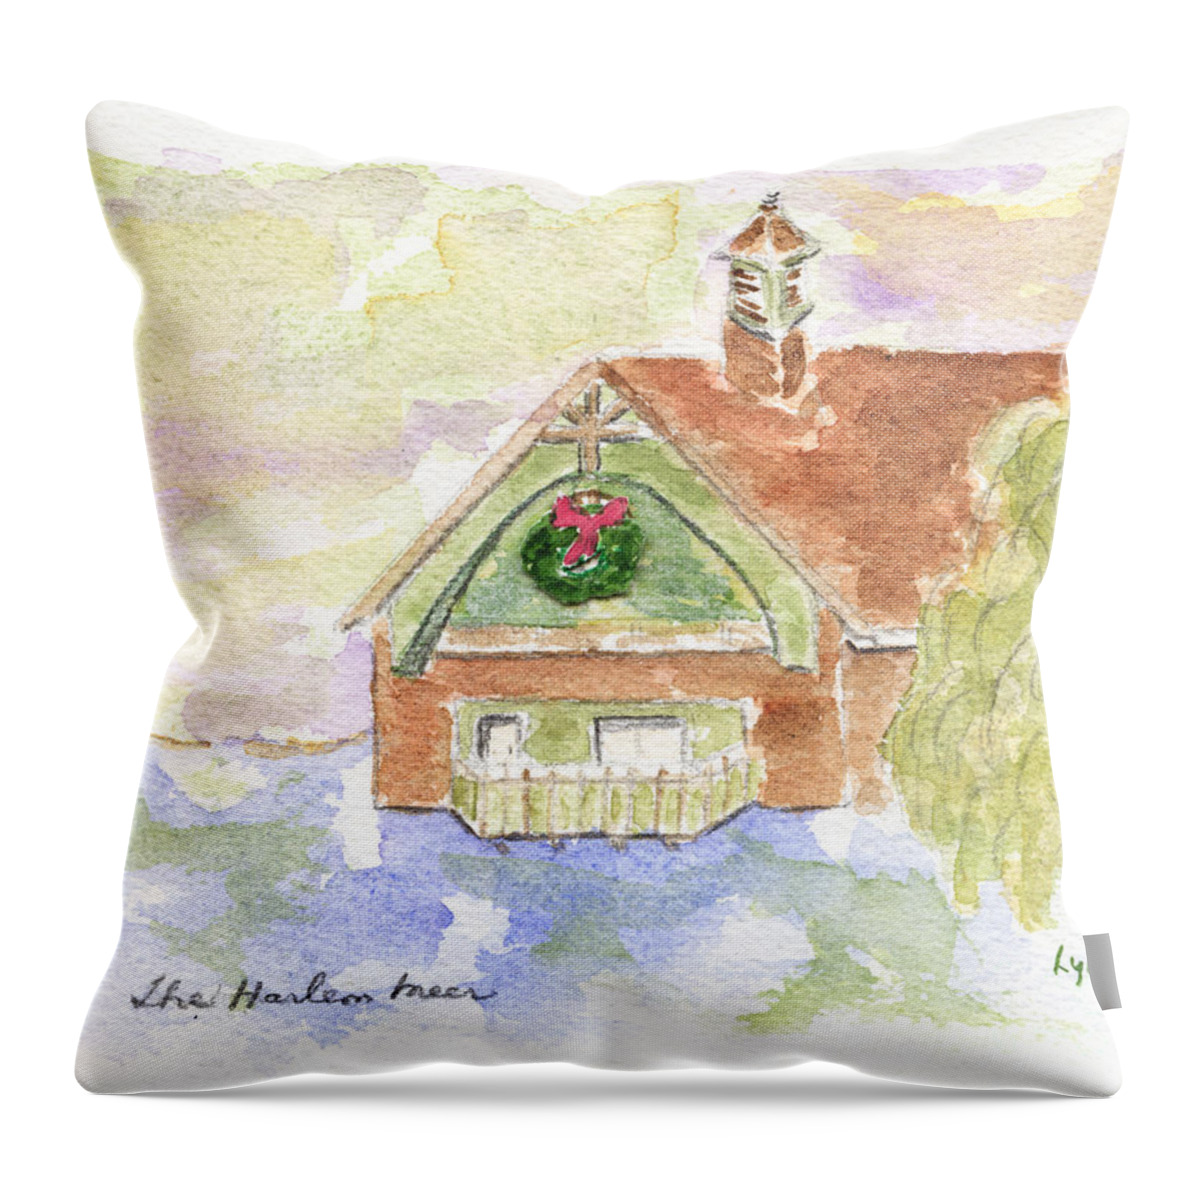 Harlem Throw Pillow featuring the painting Harlem Meer Holidays by Afinelyne